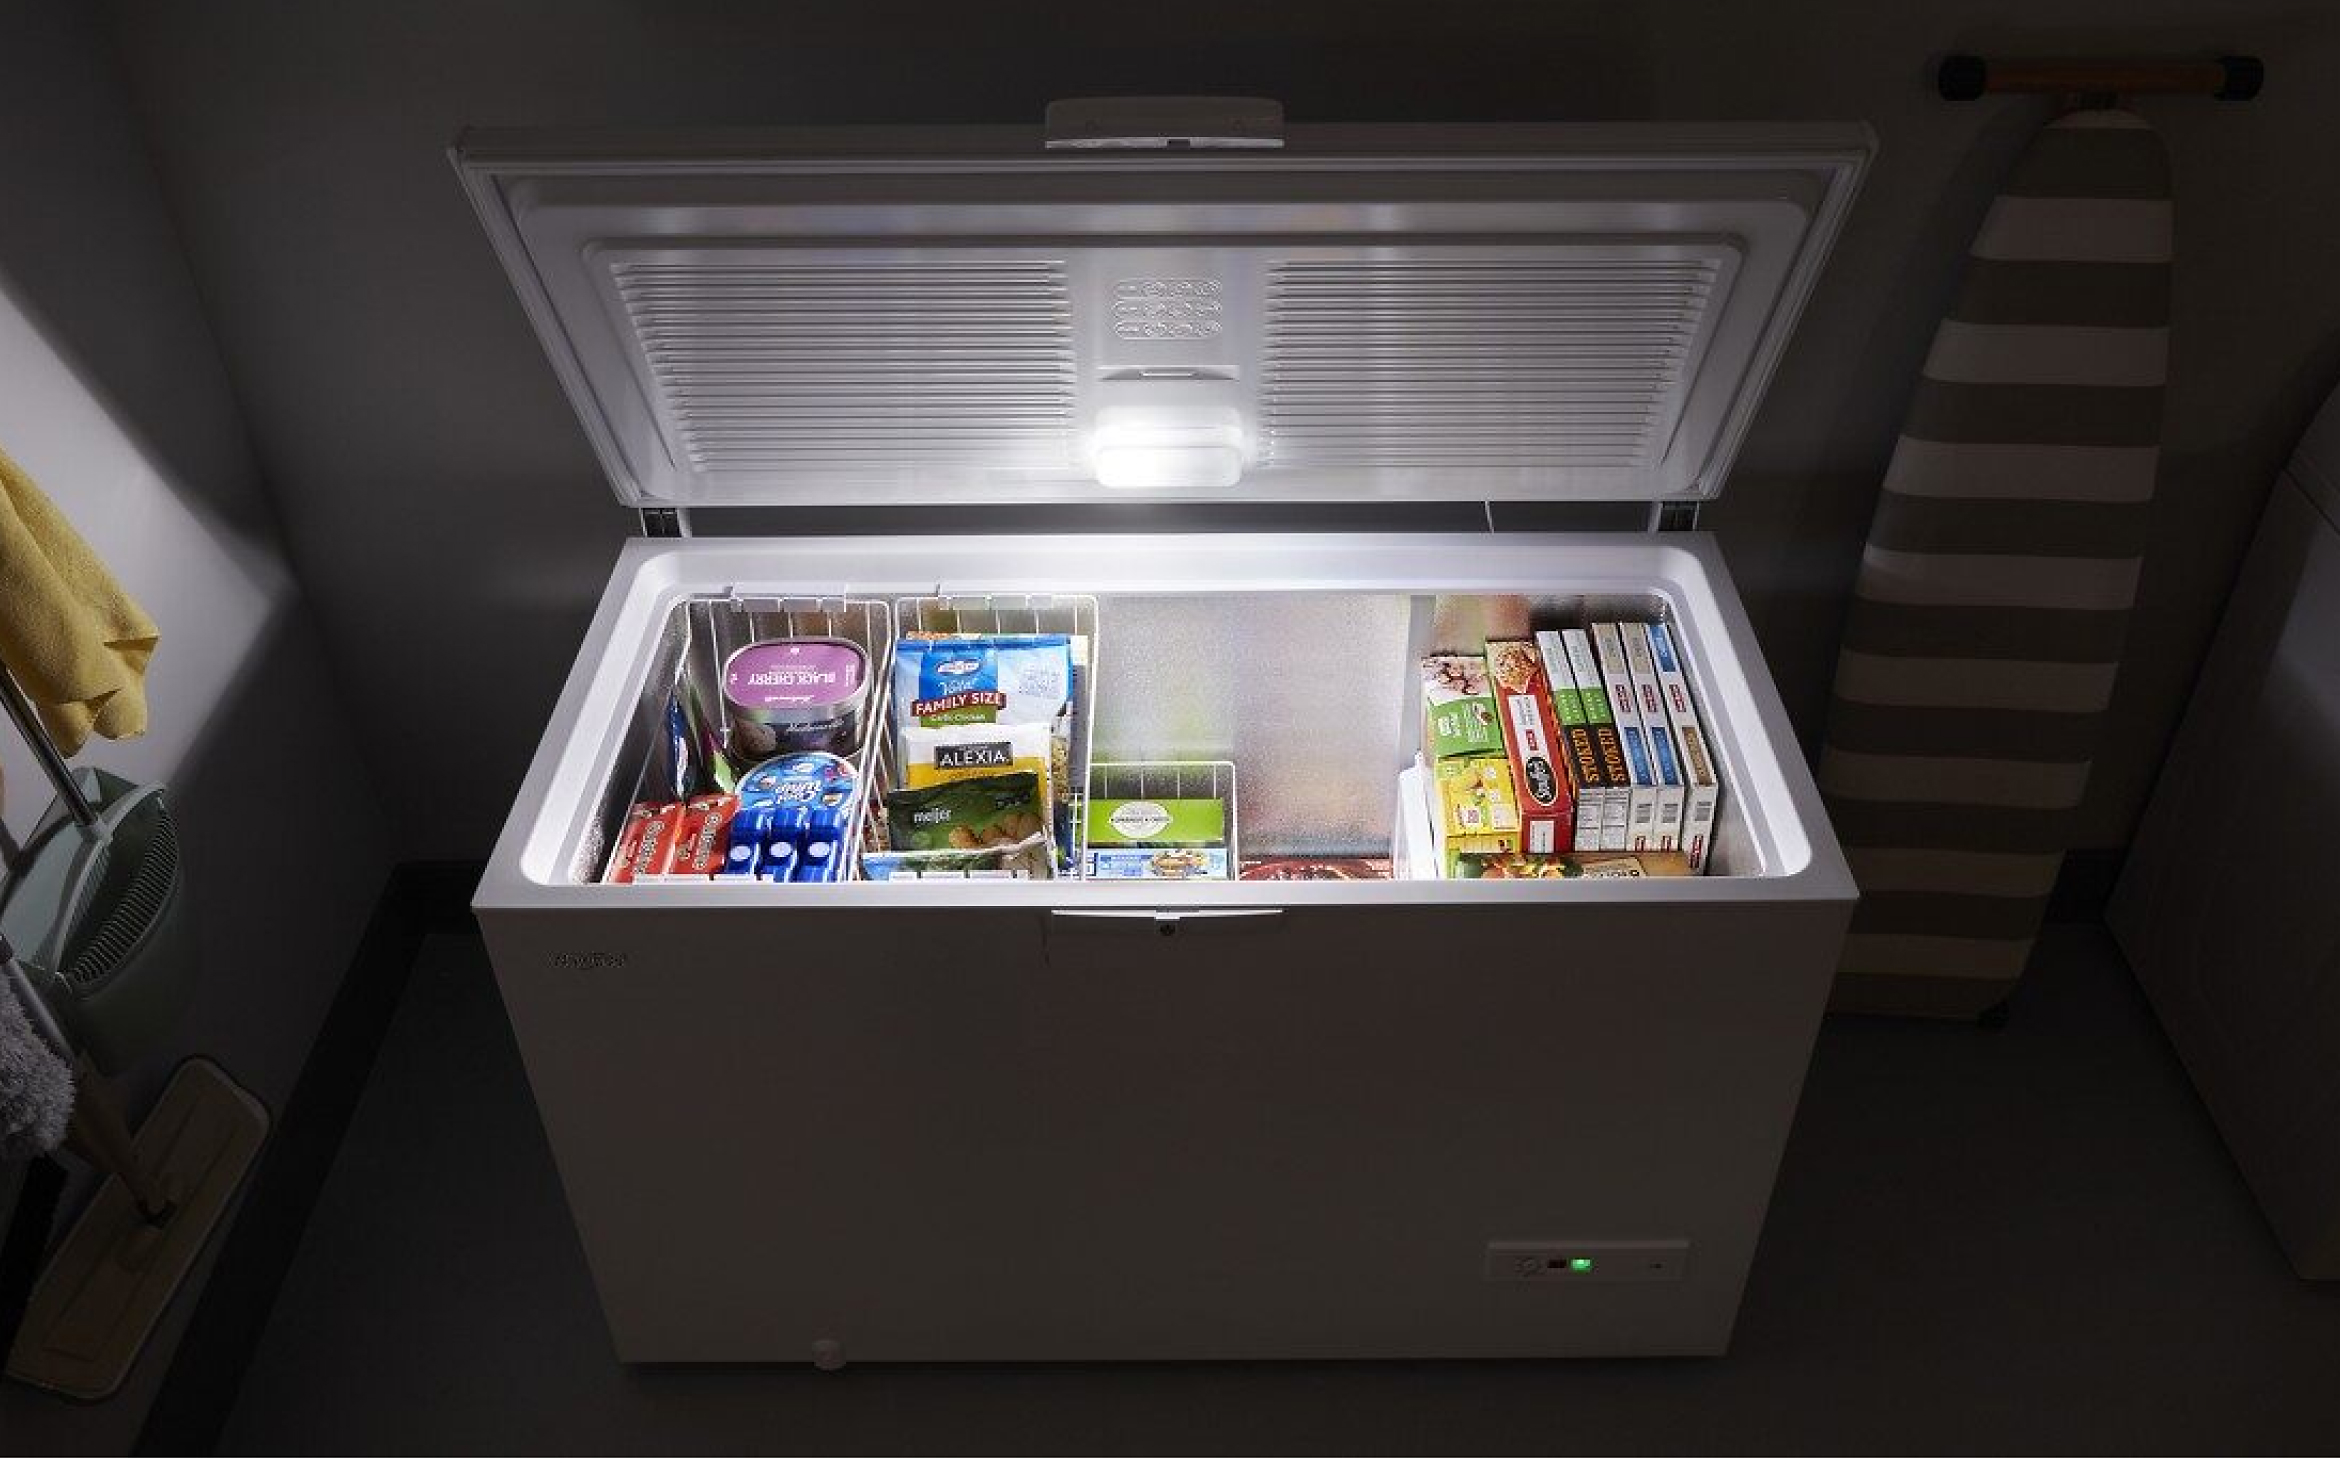 Whirlpool® deep freezer shown in dark room with lid open and LED light illuminating frozen food